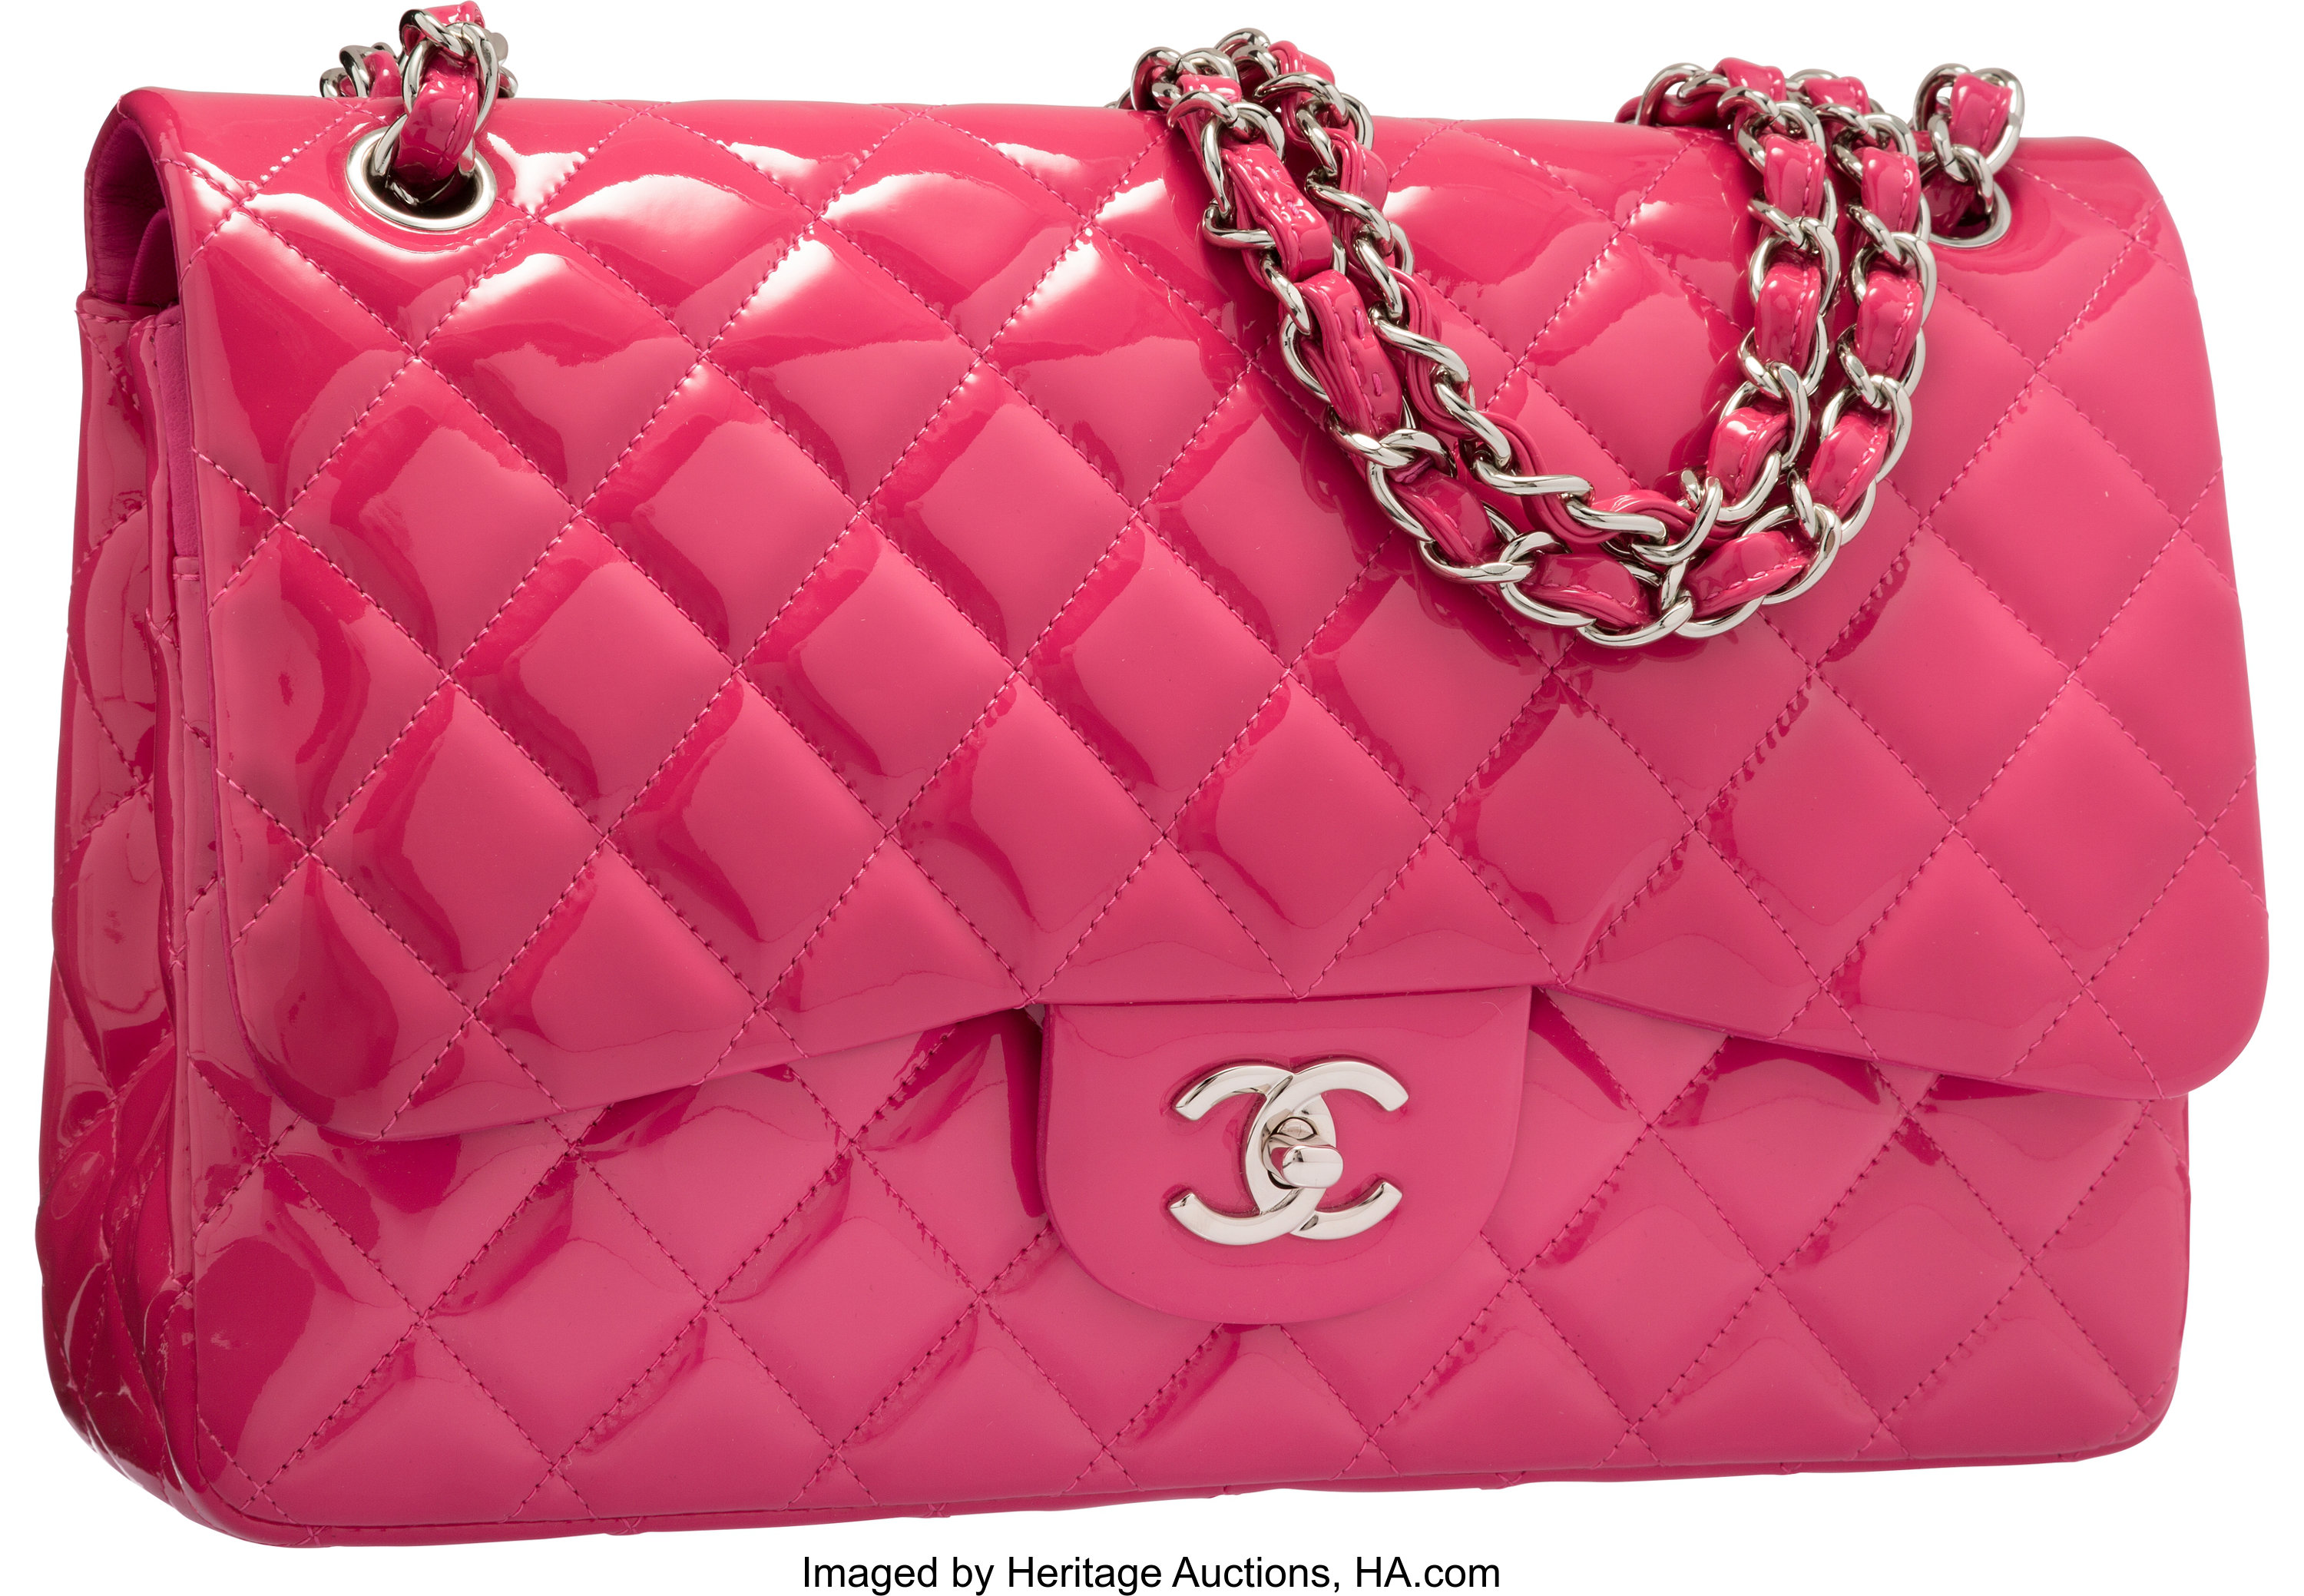 Chanel Bicolor Classic Double Flap Bag Quilted Patent Medium in